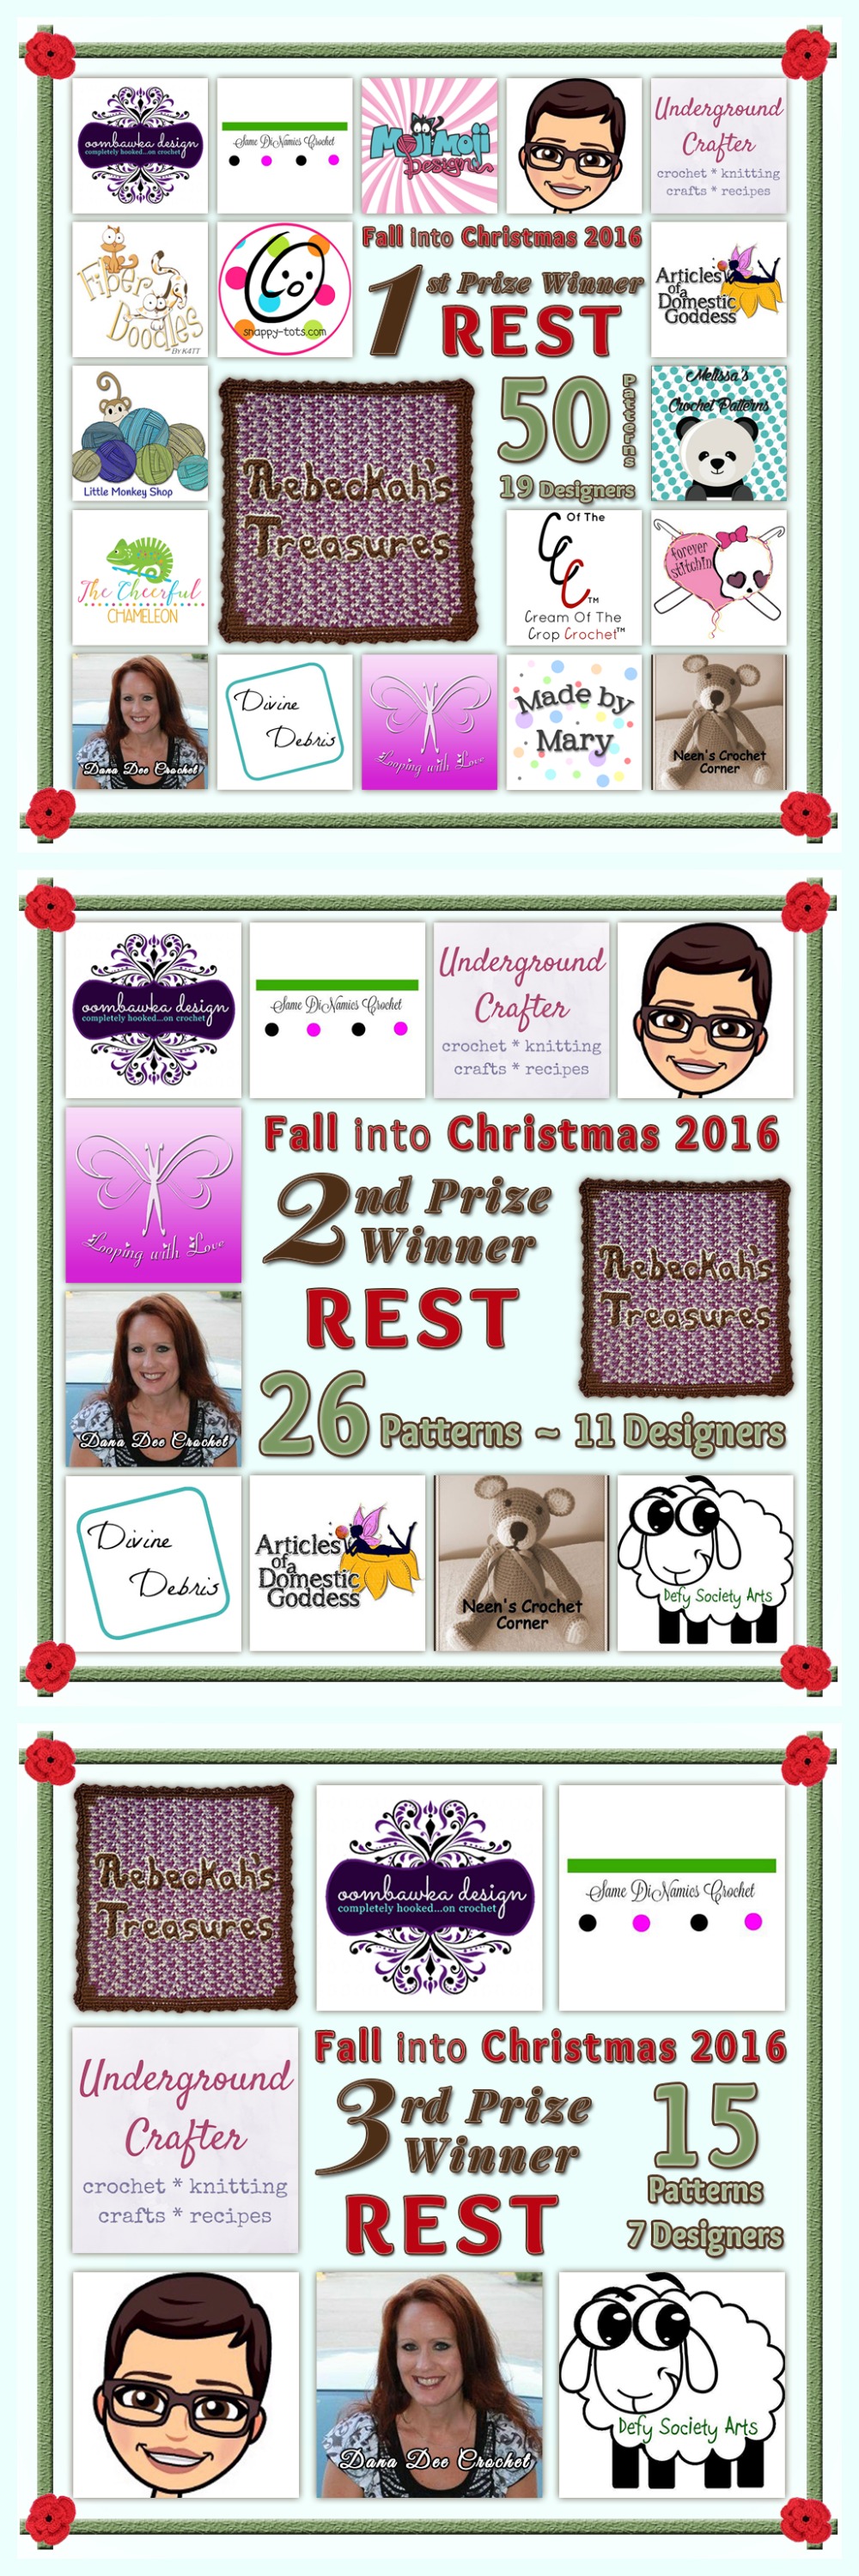 VOTE REST in the Fall into Christmas 2016 crochet contest via @beckastreasures! | Help your favourites win these awesome prizes. | Up to 5 votes daily! Vote here: https://goo.gl/8Lwng5 #fallintochristmas2016